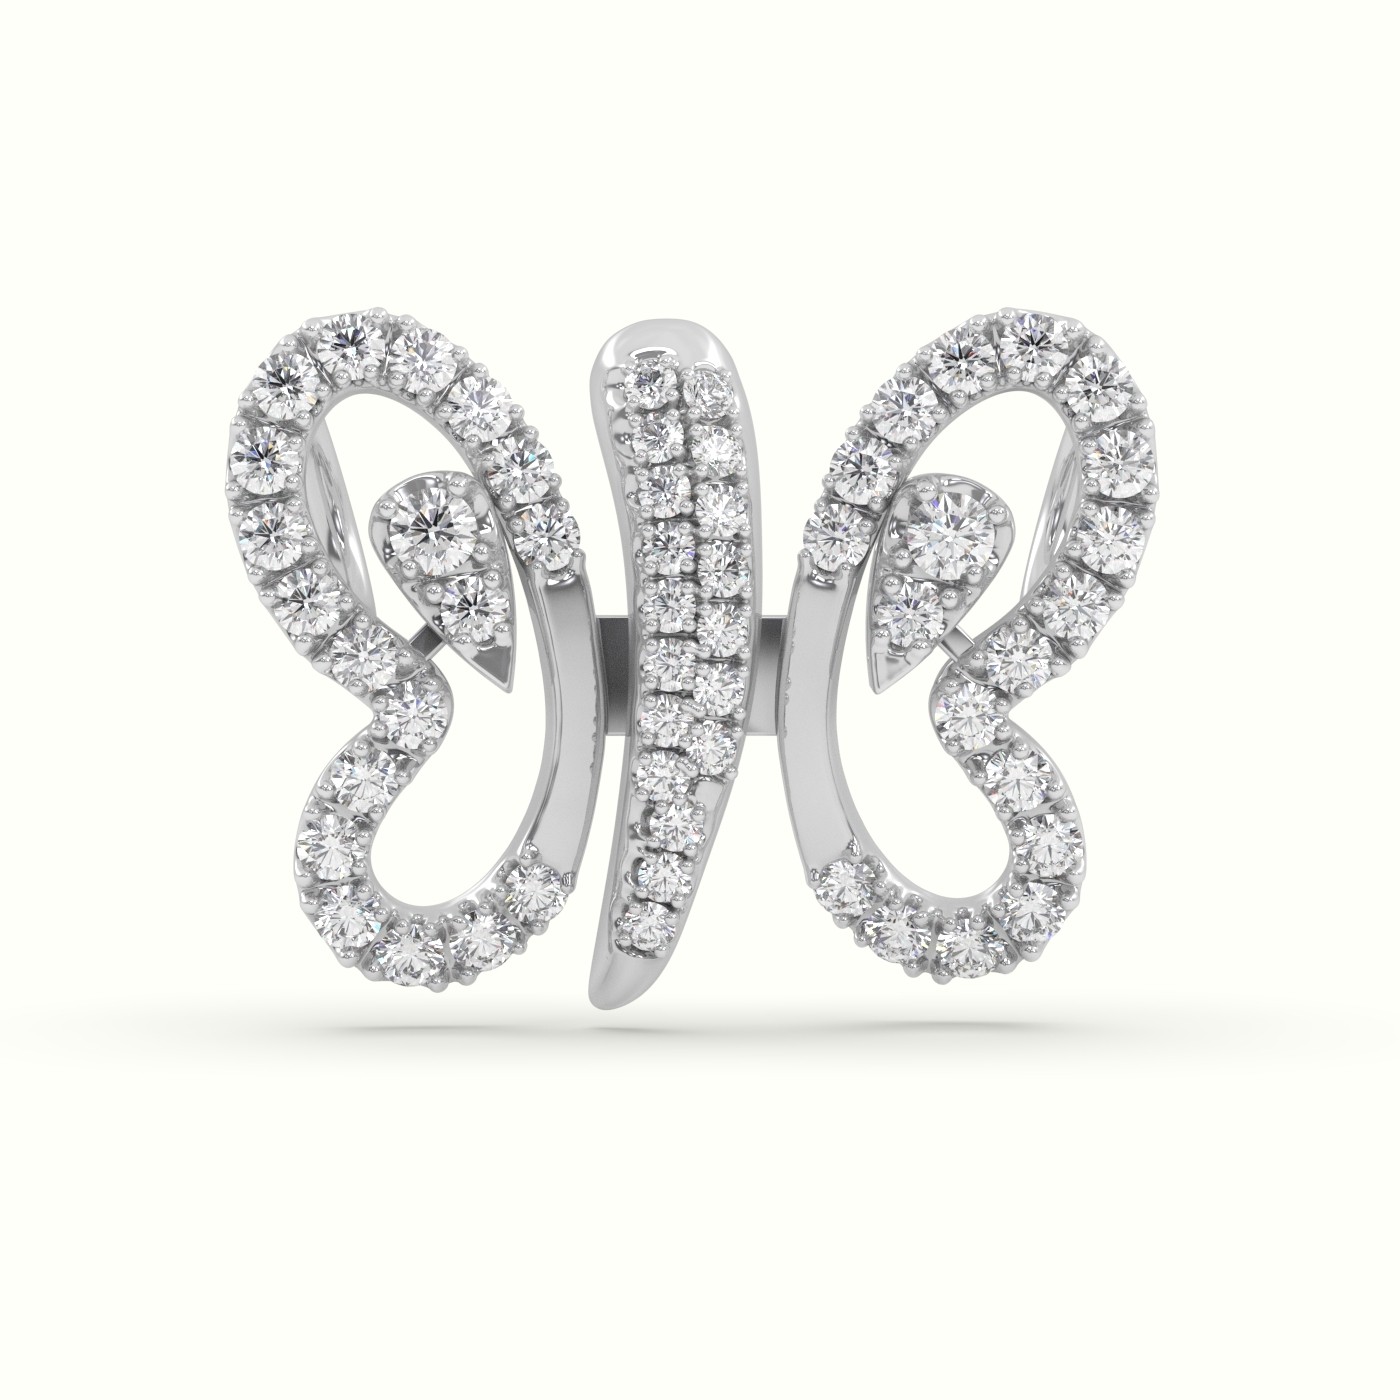 18k white gold  butterfly pendant set with total 1 carat round diamonds